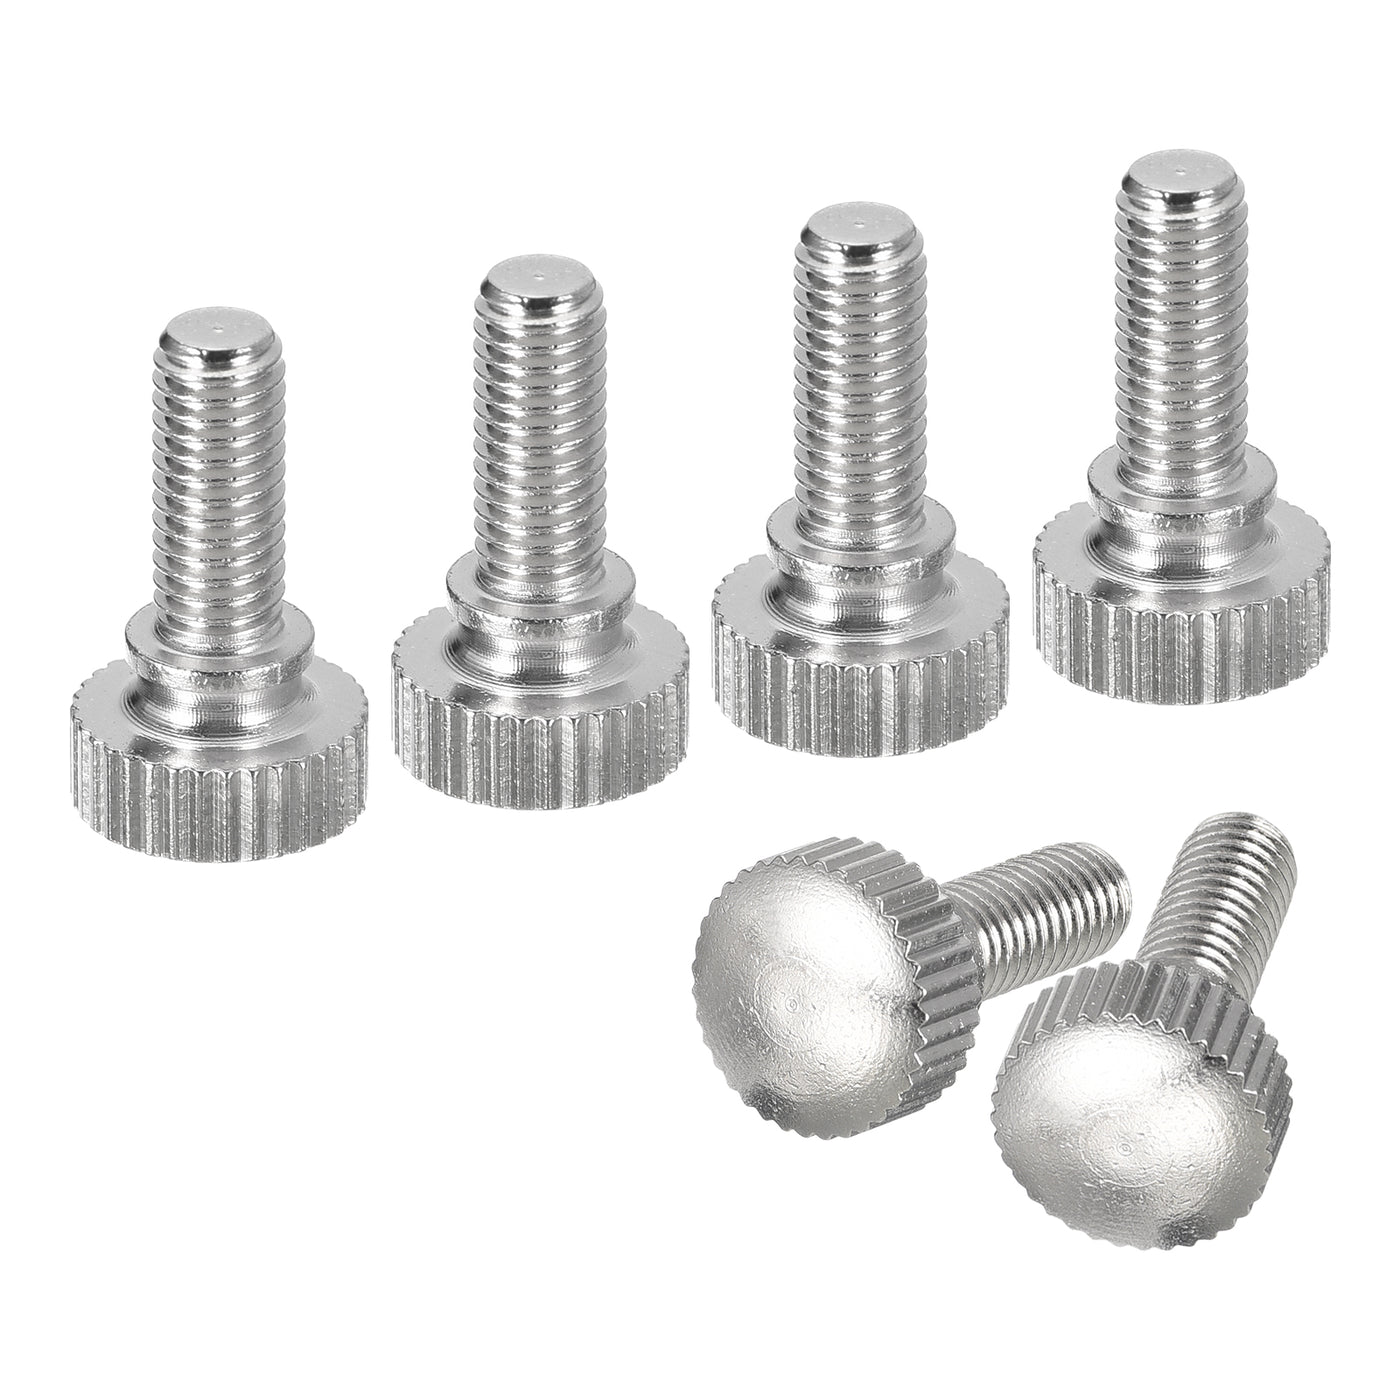 uxcell Uxcell M5x12mm Knurled Thumb Screws, 6pcs Brass Thumb Screws with Shoulder, Silver Tone